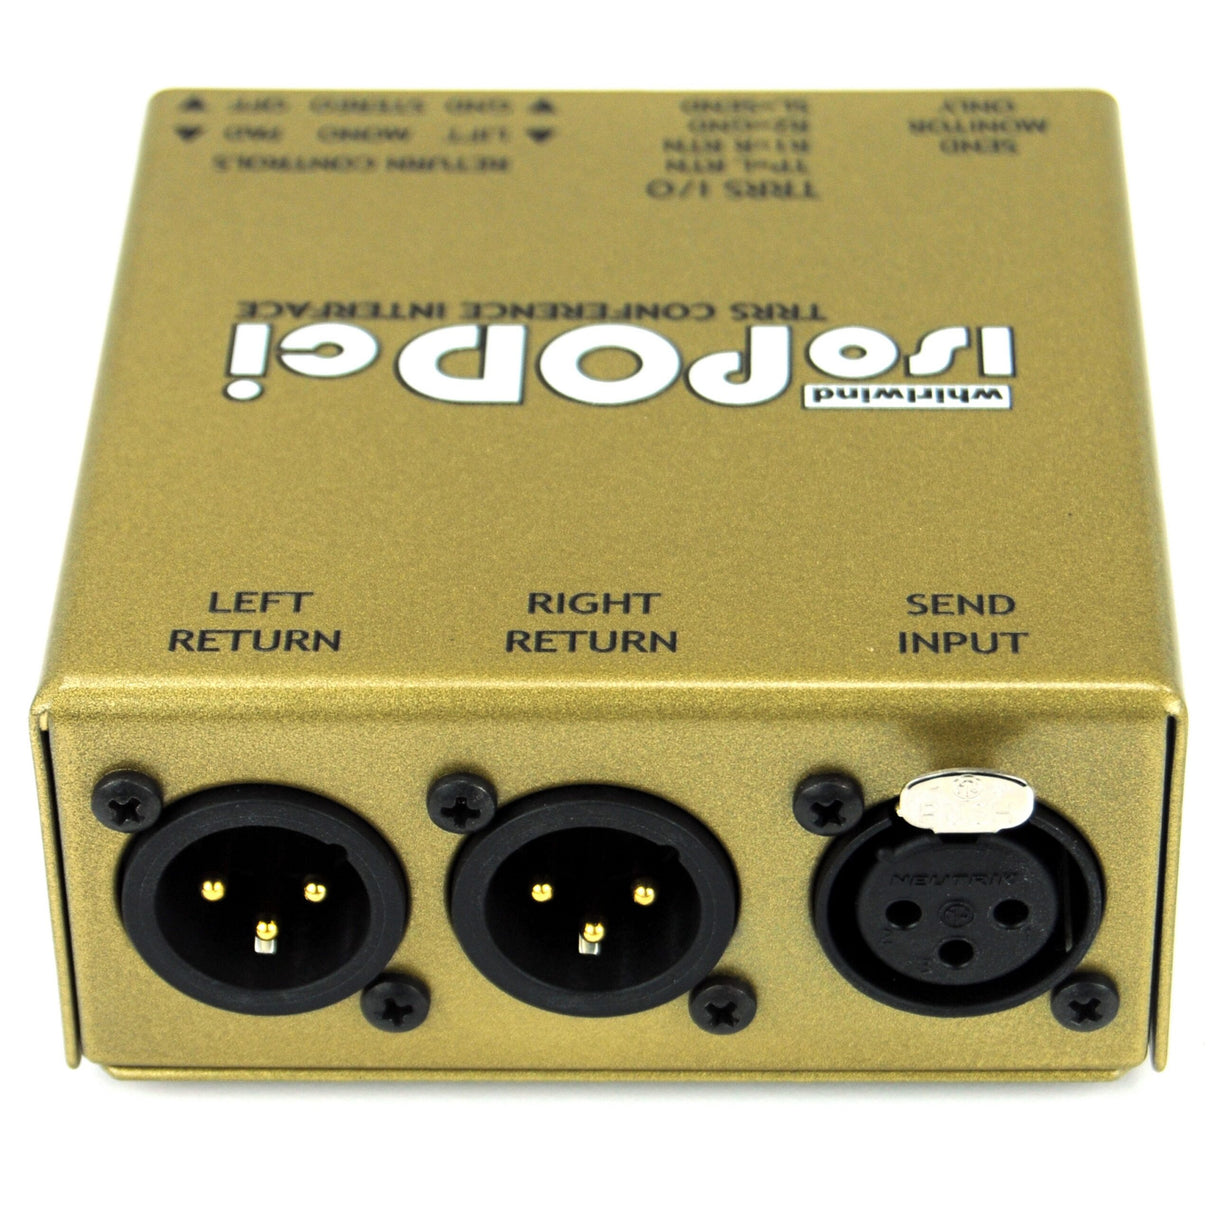 Whirlwind ISOPODCI Audio Interface for Mobile Devices